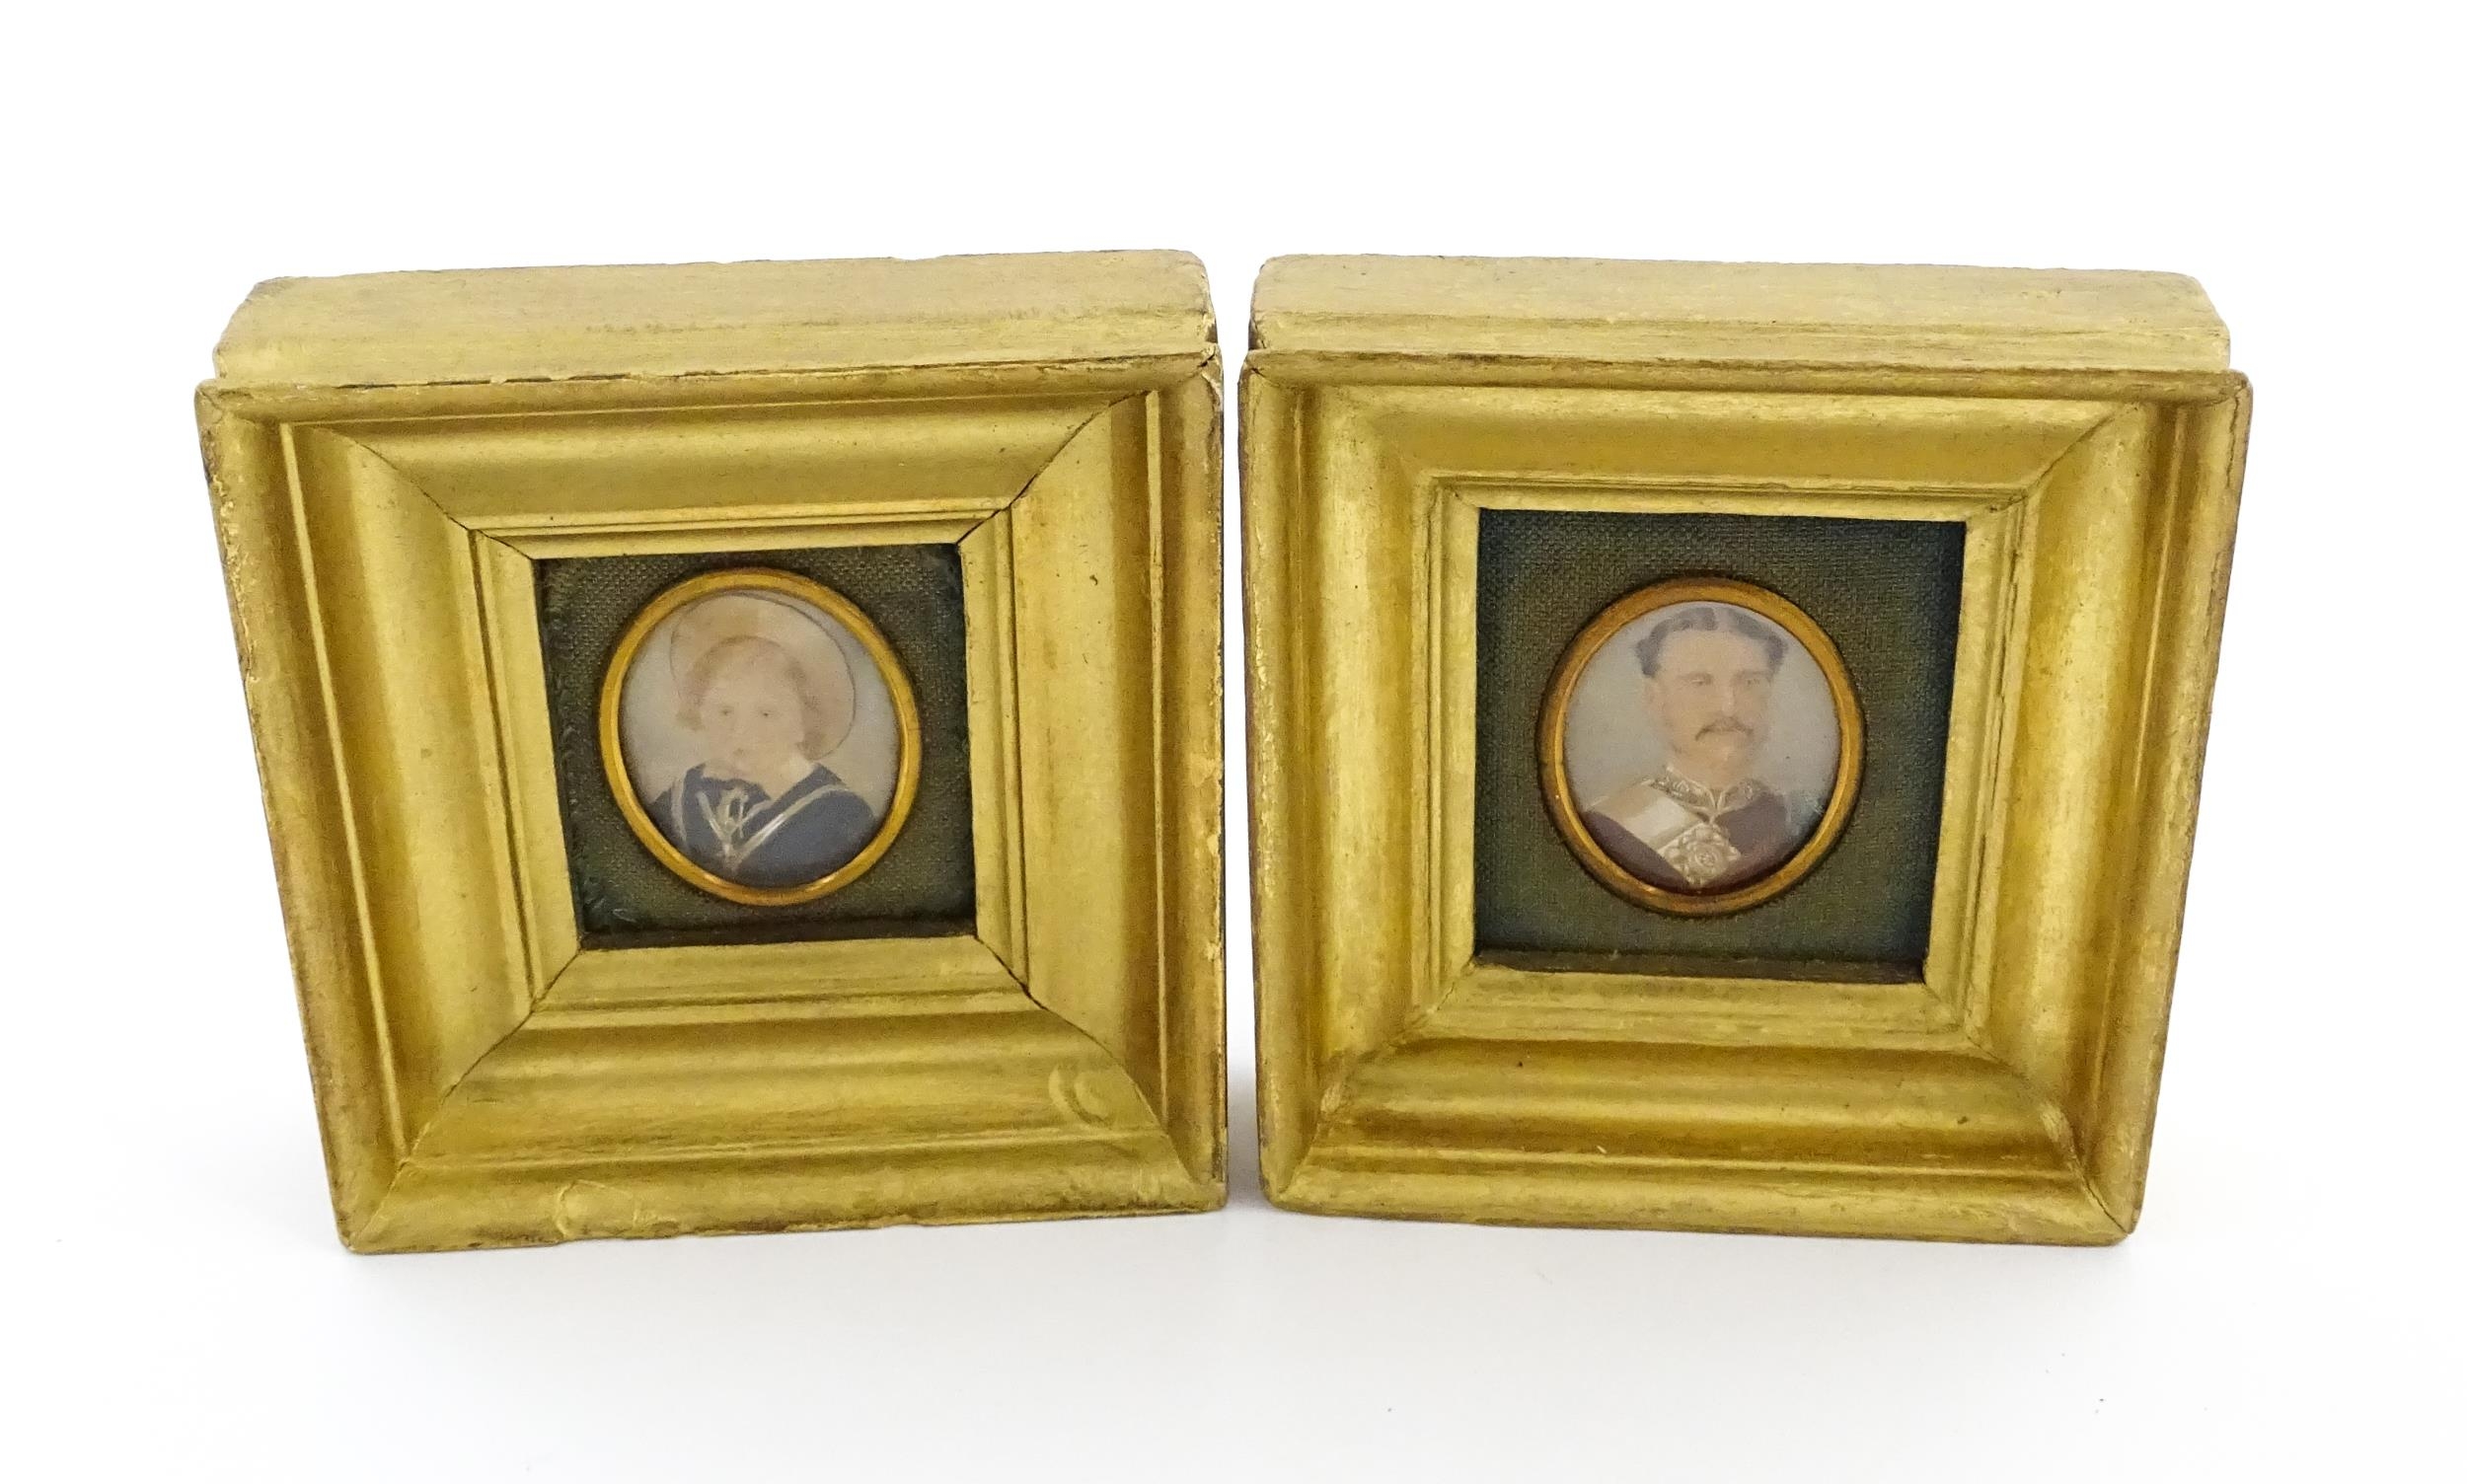 Two 19thC watercolour portrait miniatures, one depicting a gentleman wearing military dress, the